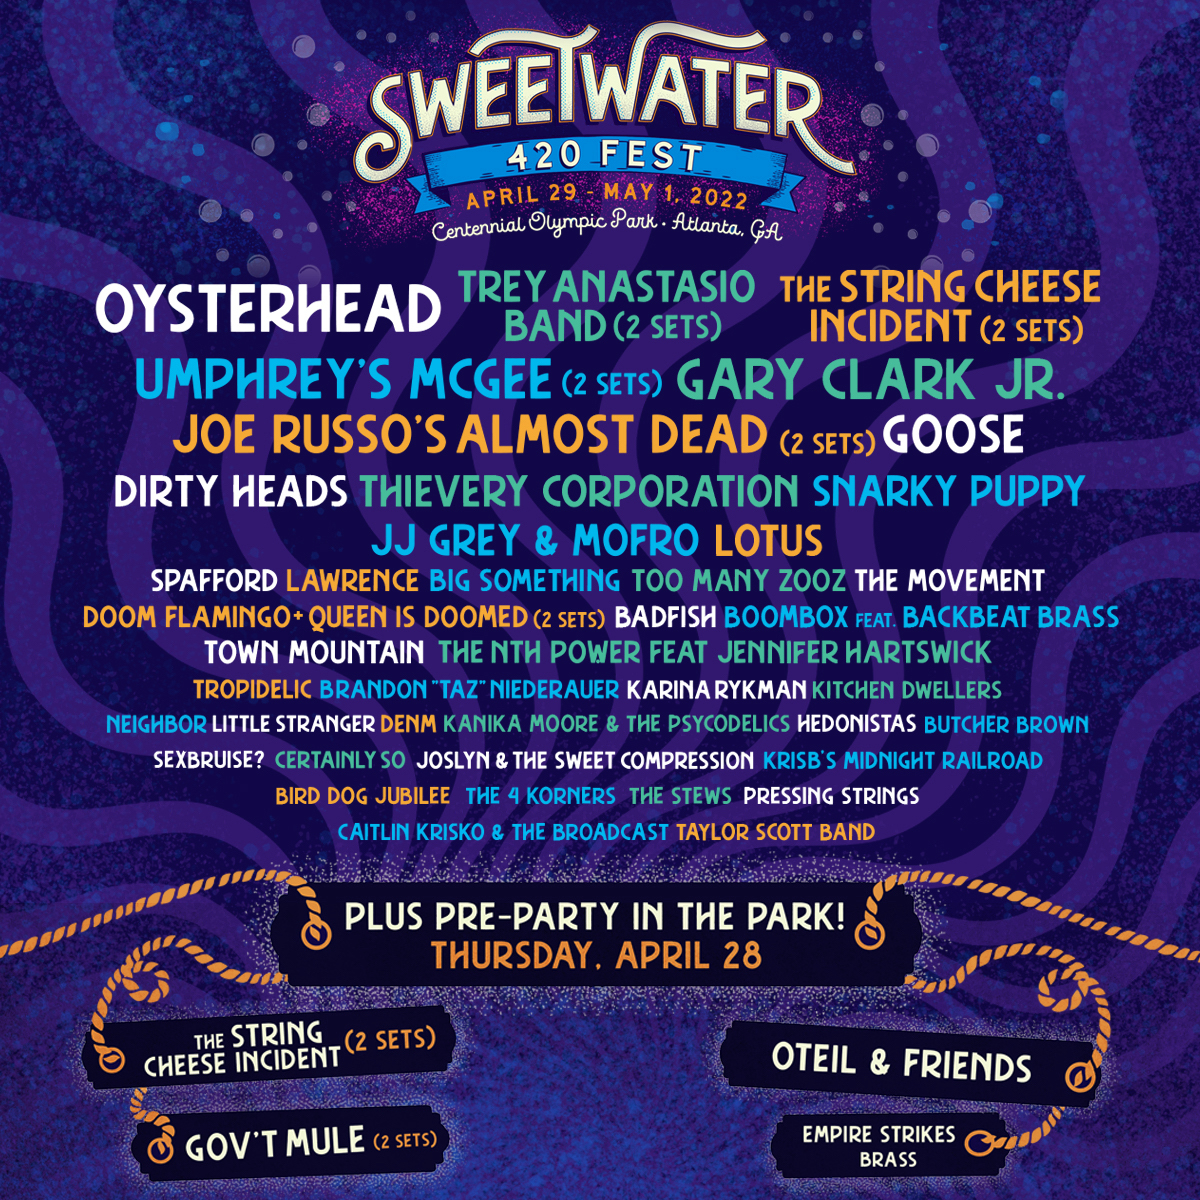 Sweetwater 420 Fest Georgia 2022 Line Up